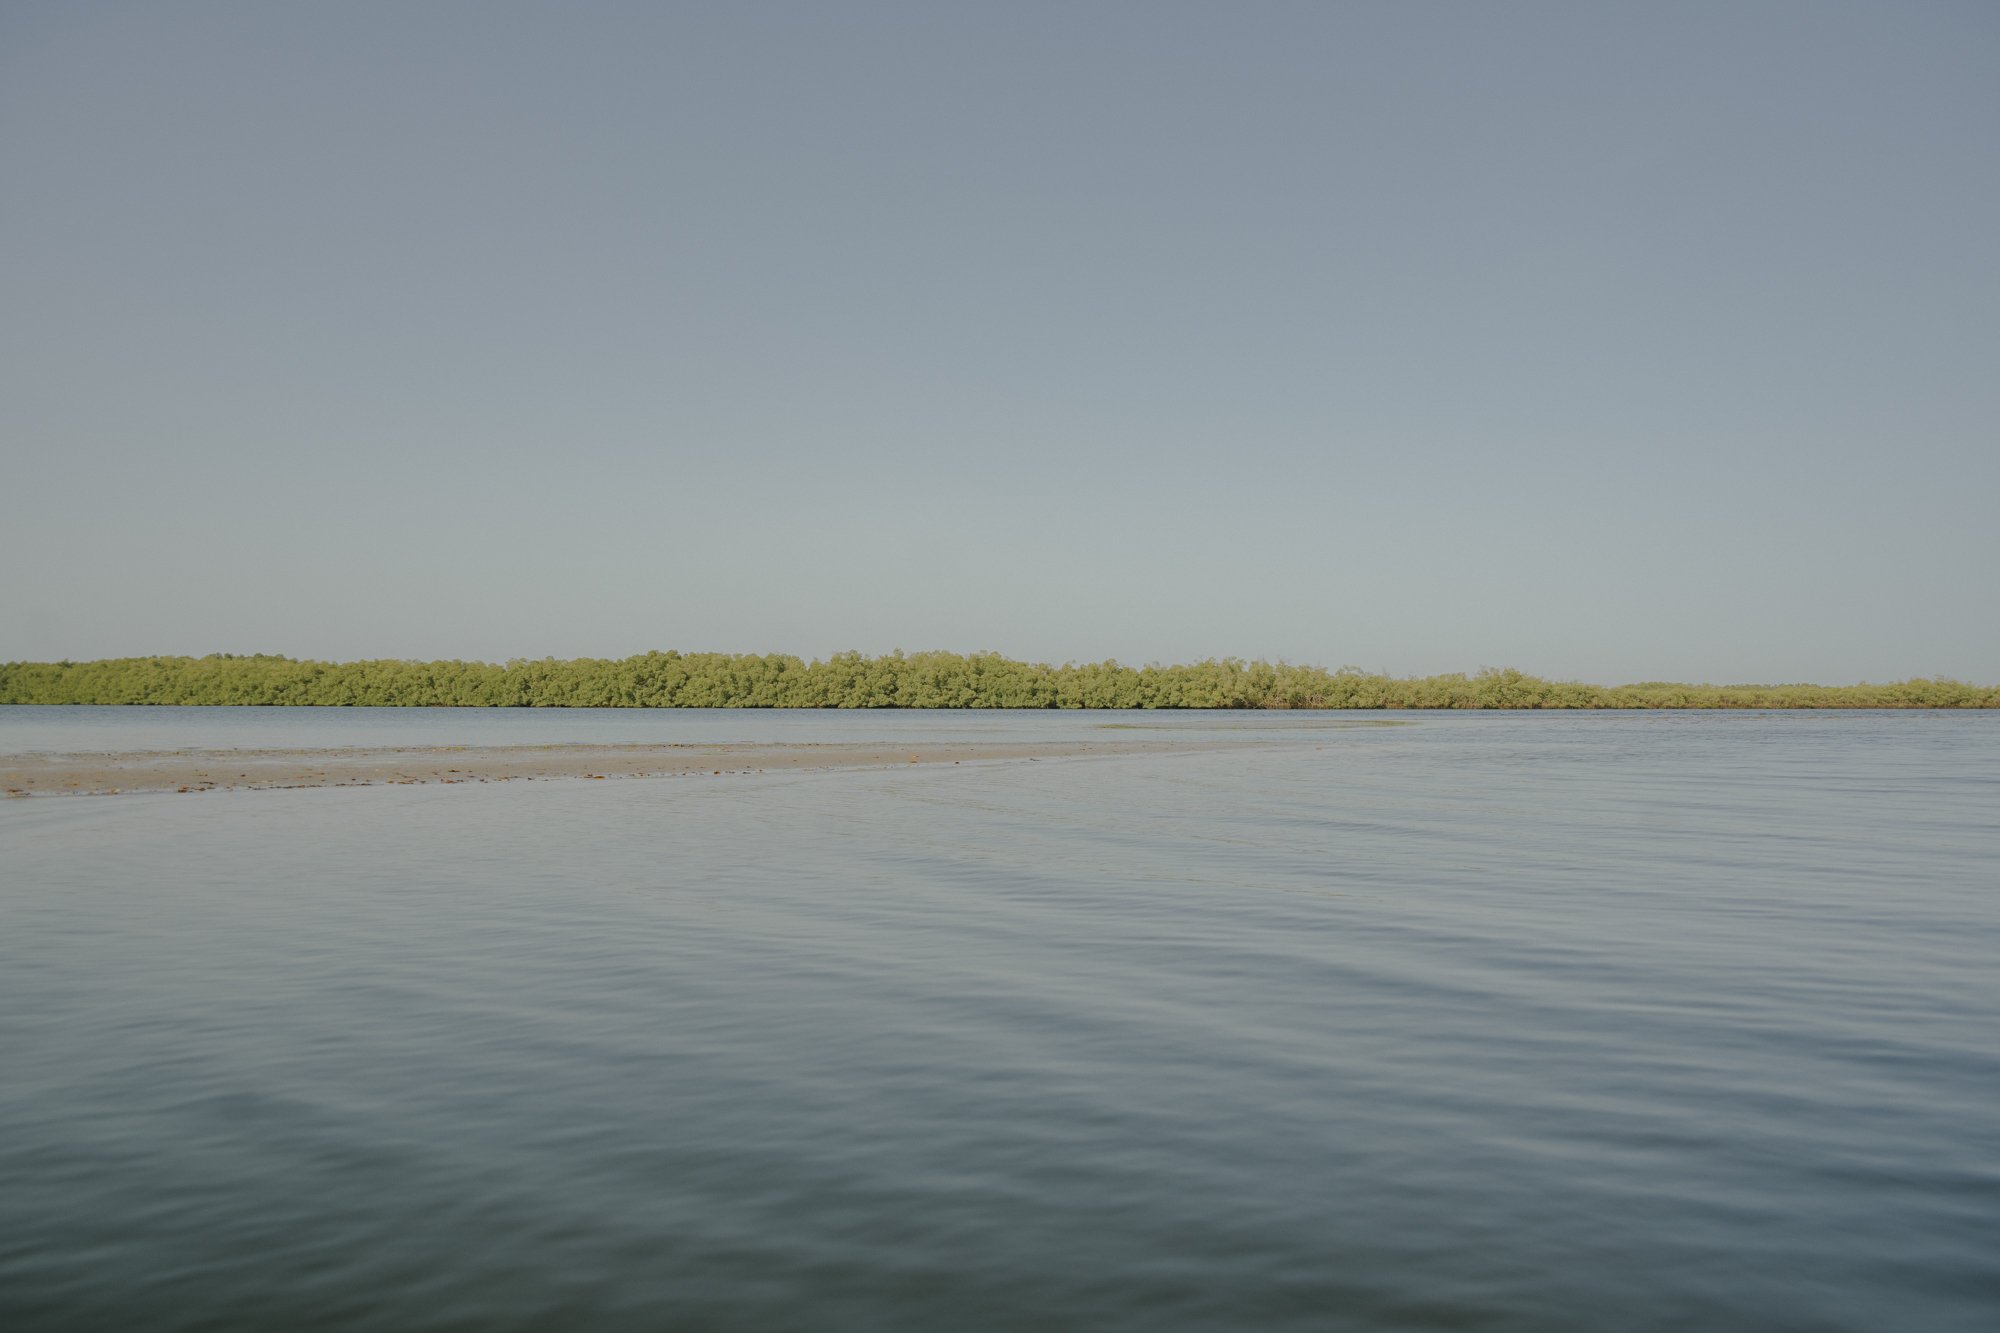 BY THE MANGROVES